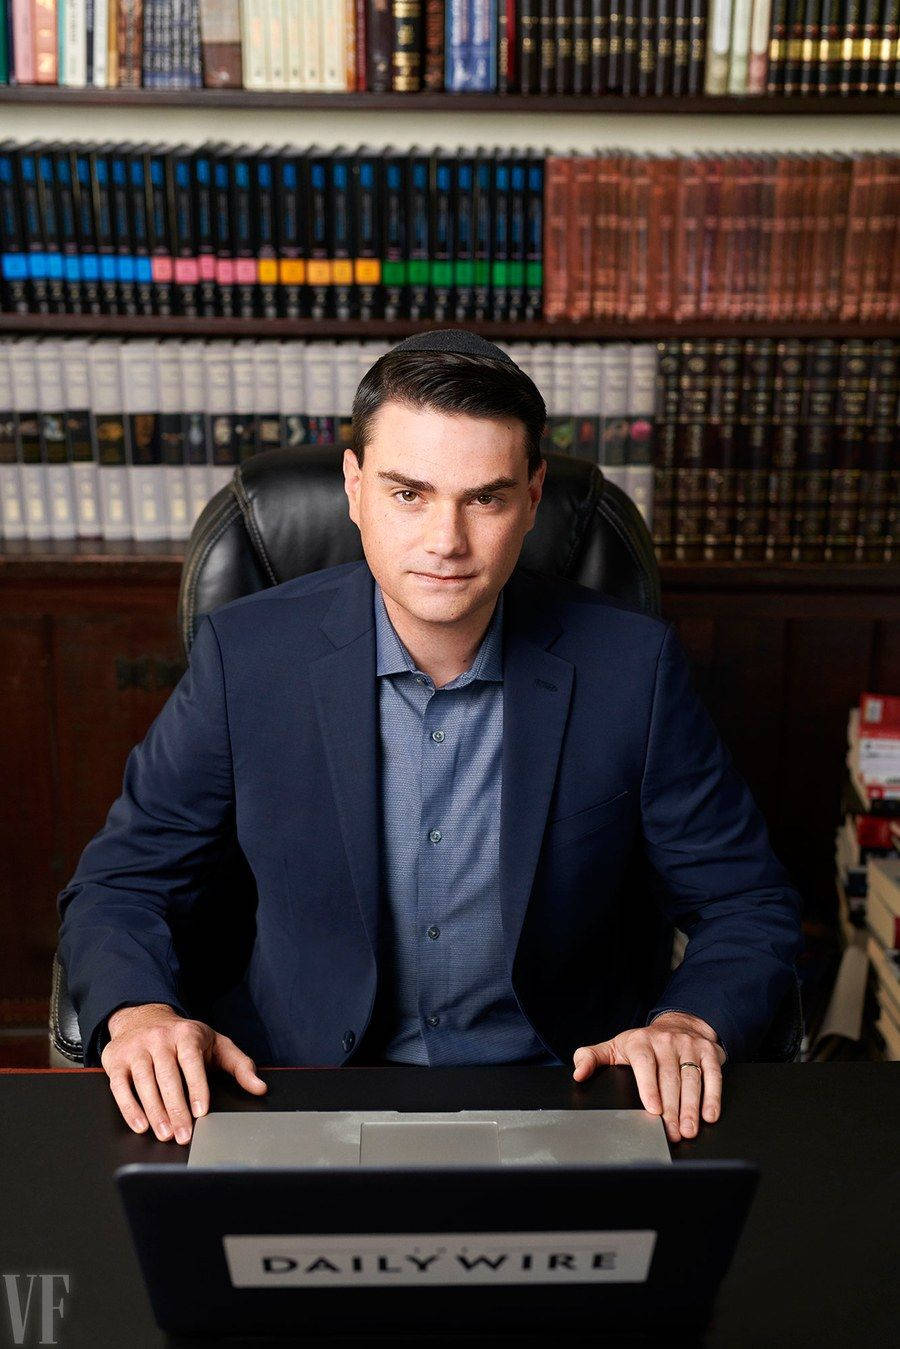 Ben Shapiro The Daily Wire Founder Wallpaper